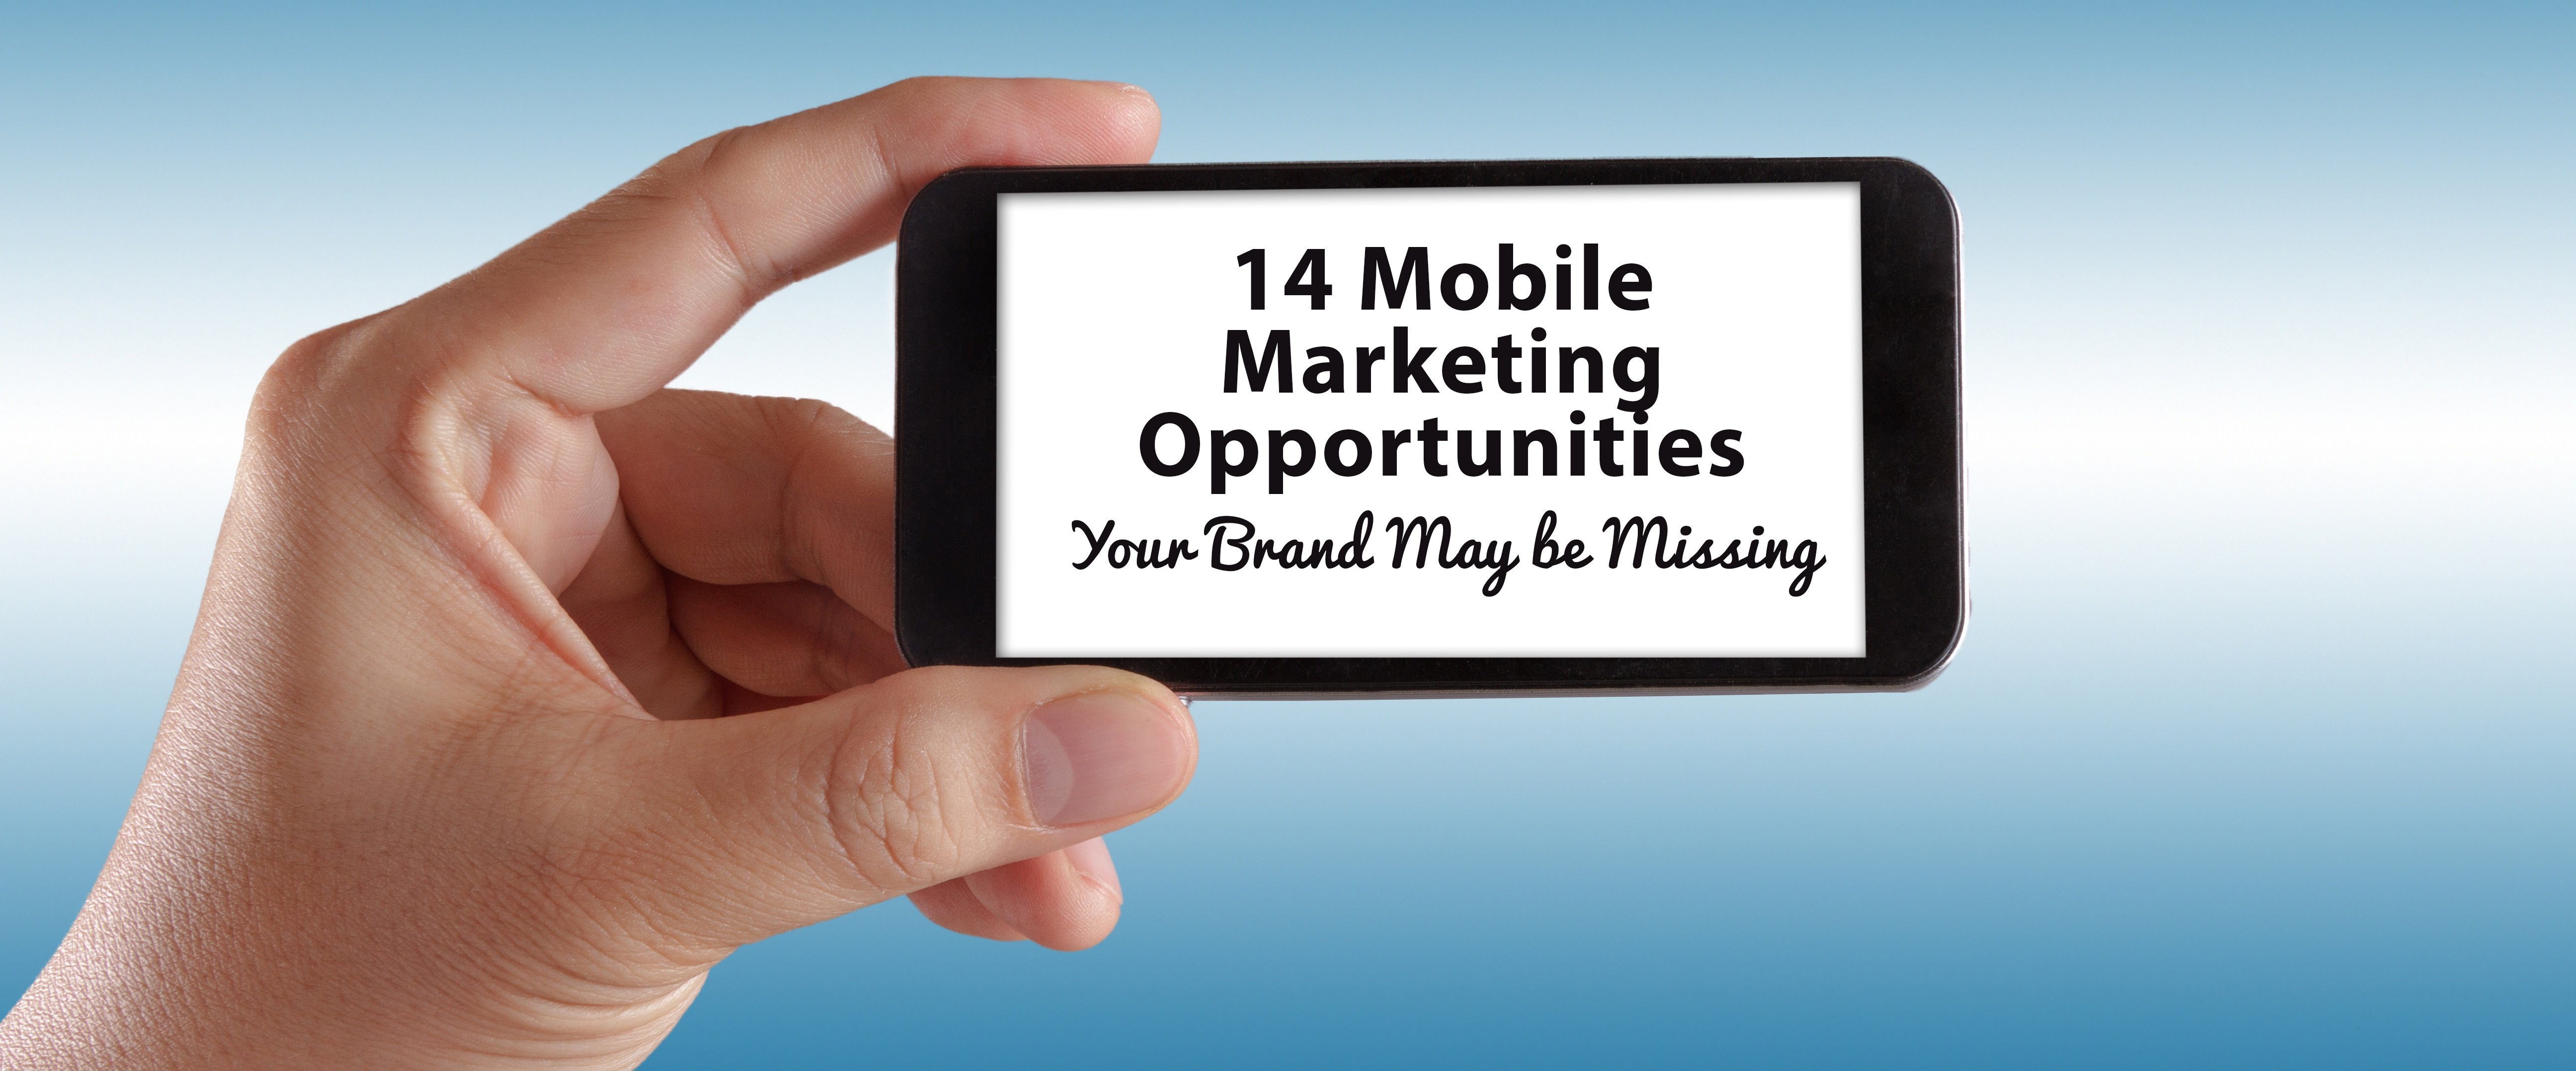 14 Mobile Marketing Opportunities Your Brand May be Missing.jpg